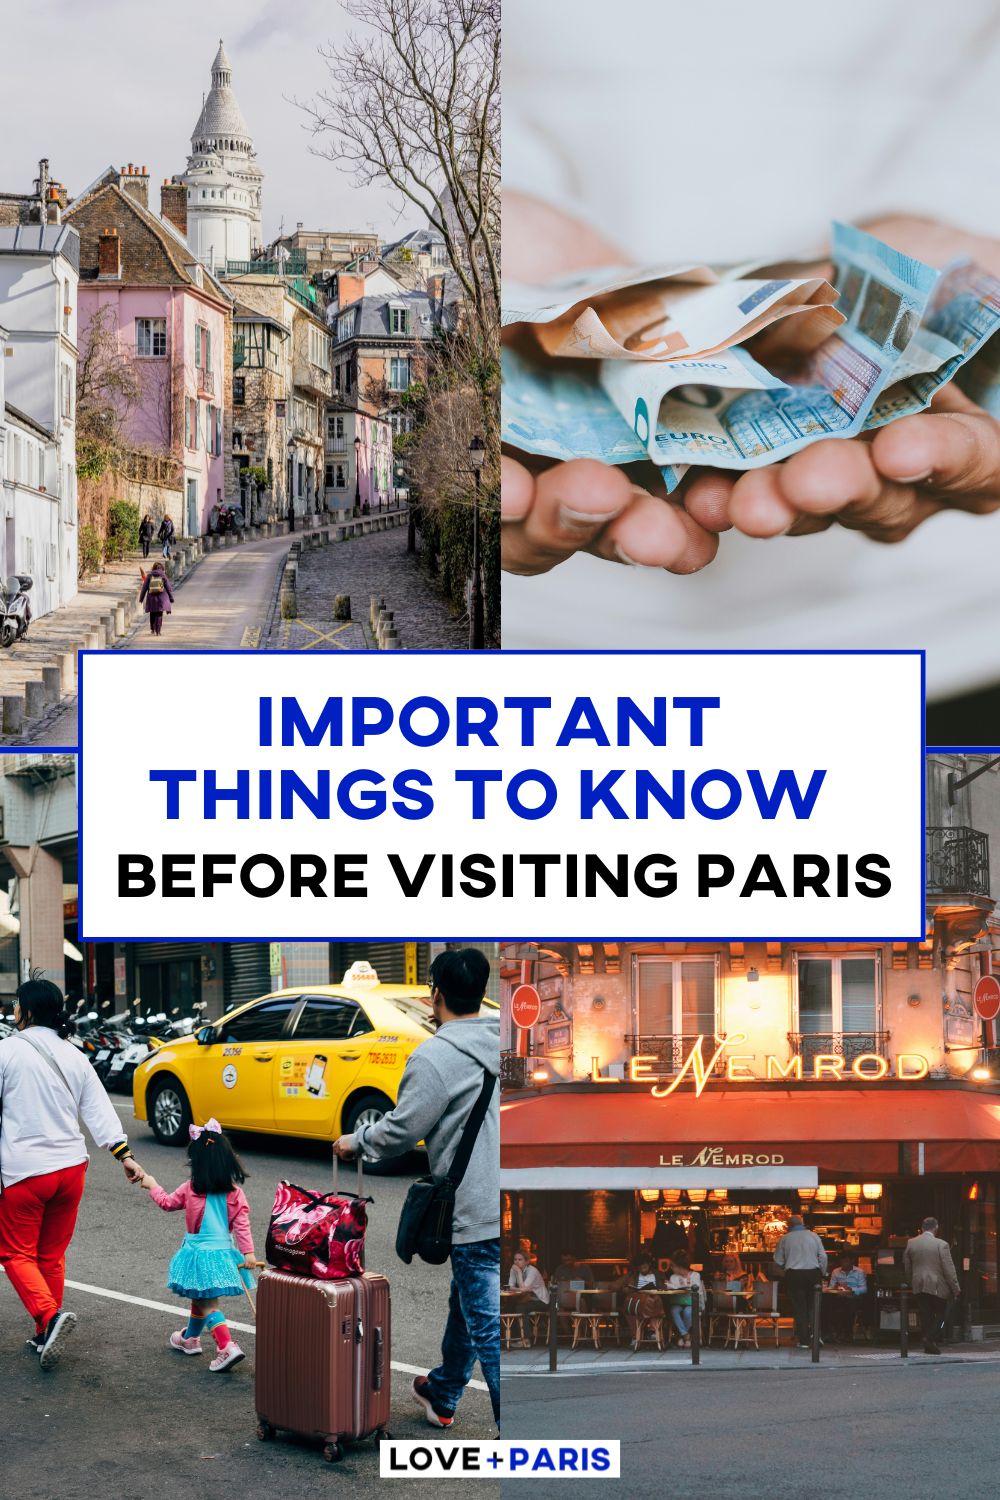 This is a Pinterest pin detailing important things to know before visiting Paris.